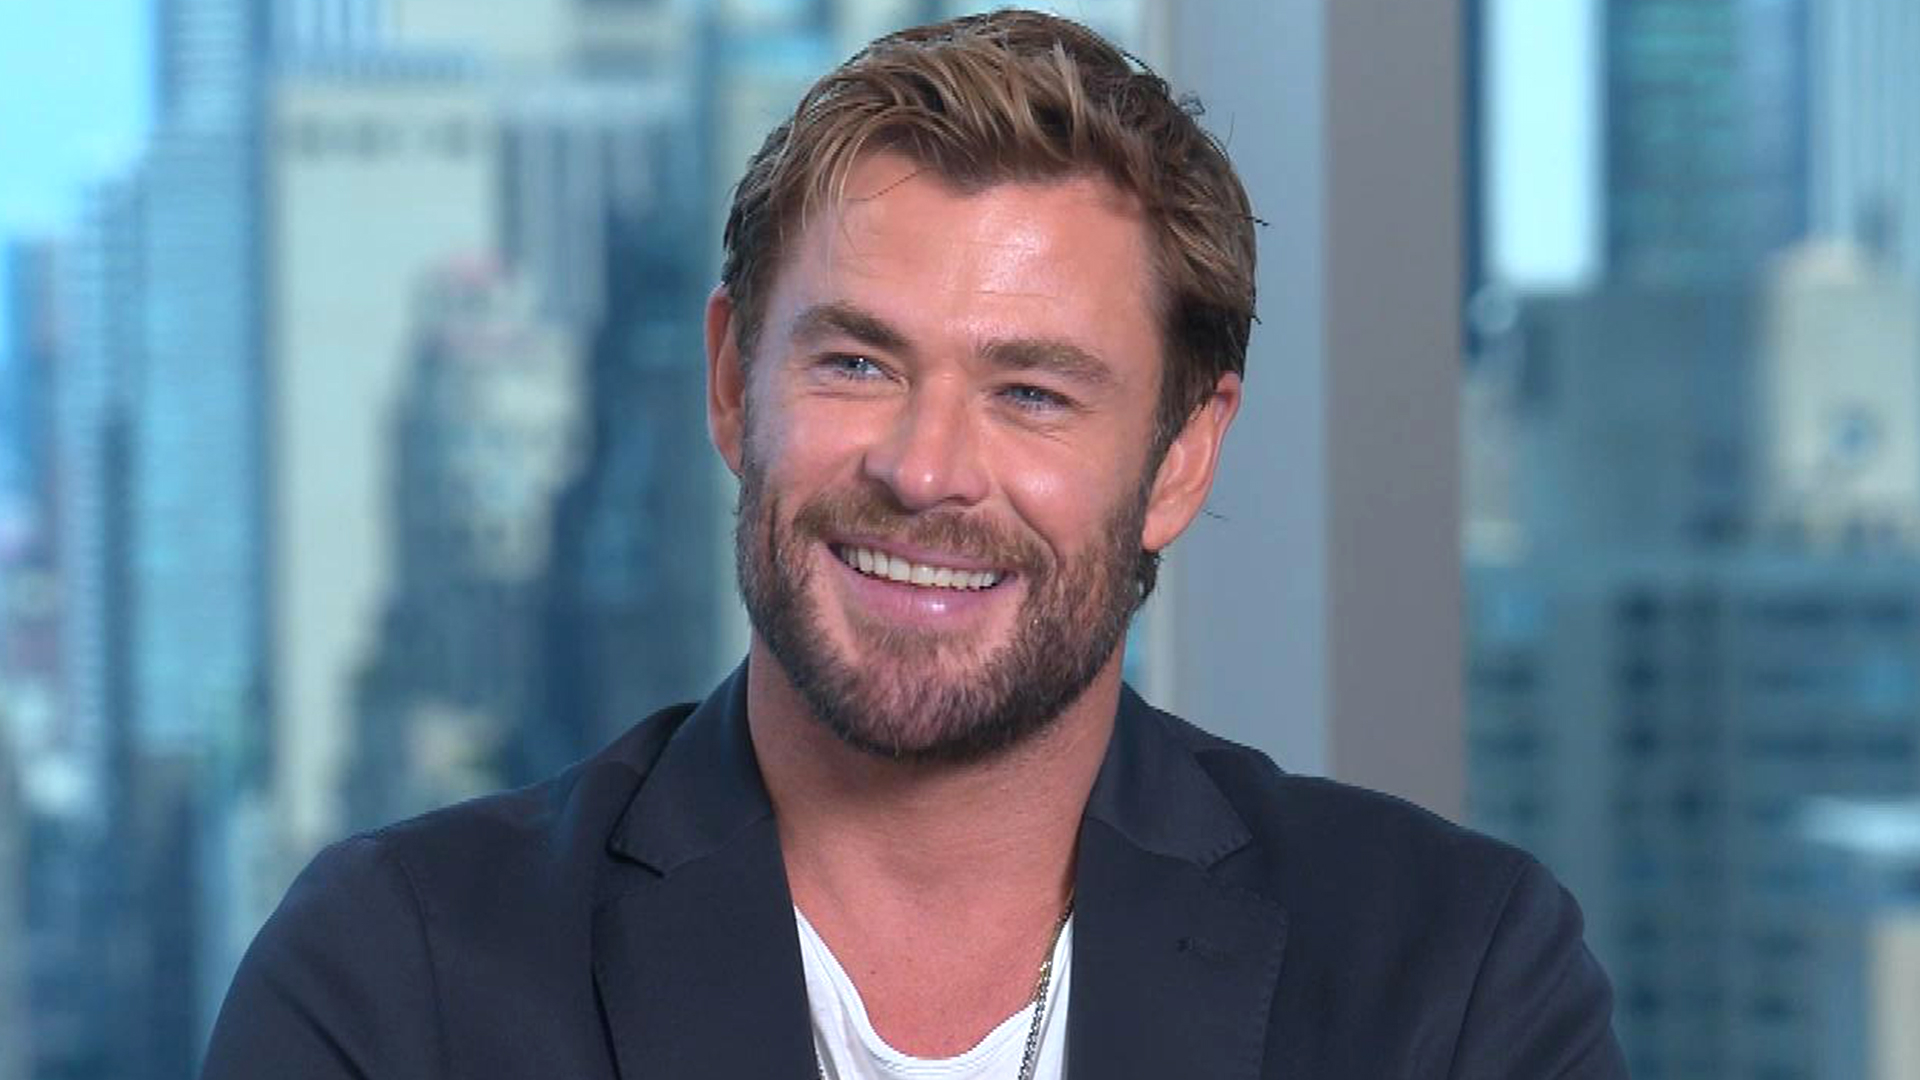 Chris Hemsworth fans support 'Thor' star amid retirement claims